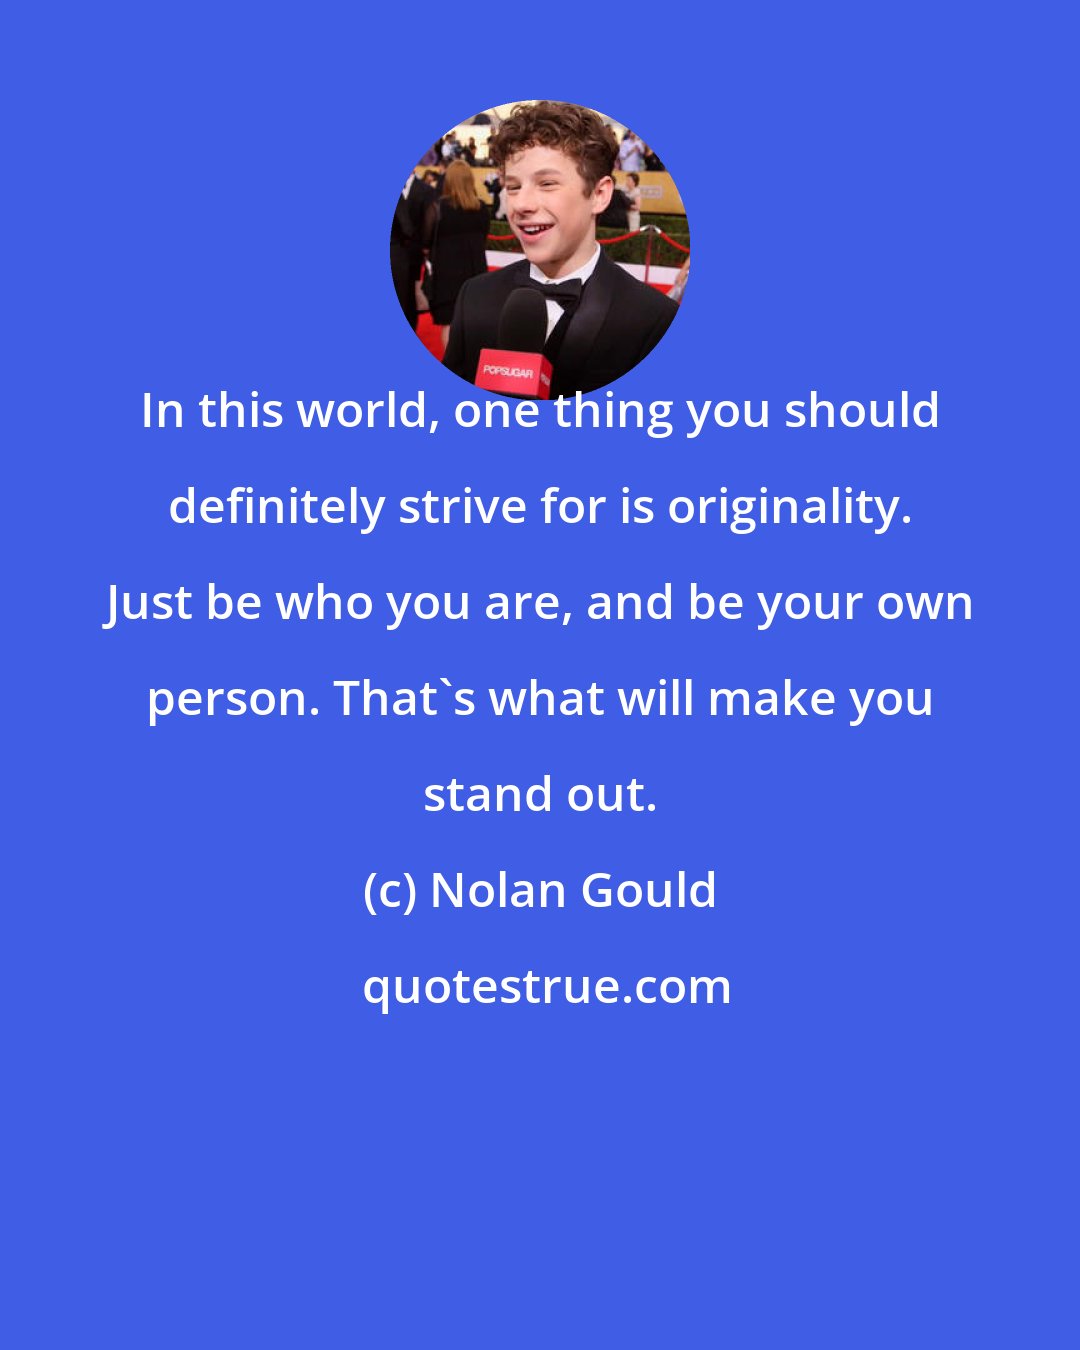 Nolan Gould: In this world, one thing you should definitely strive for is originality. Just be who you are, and be your own person. That's what will make you stand out.